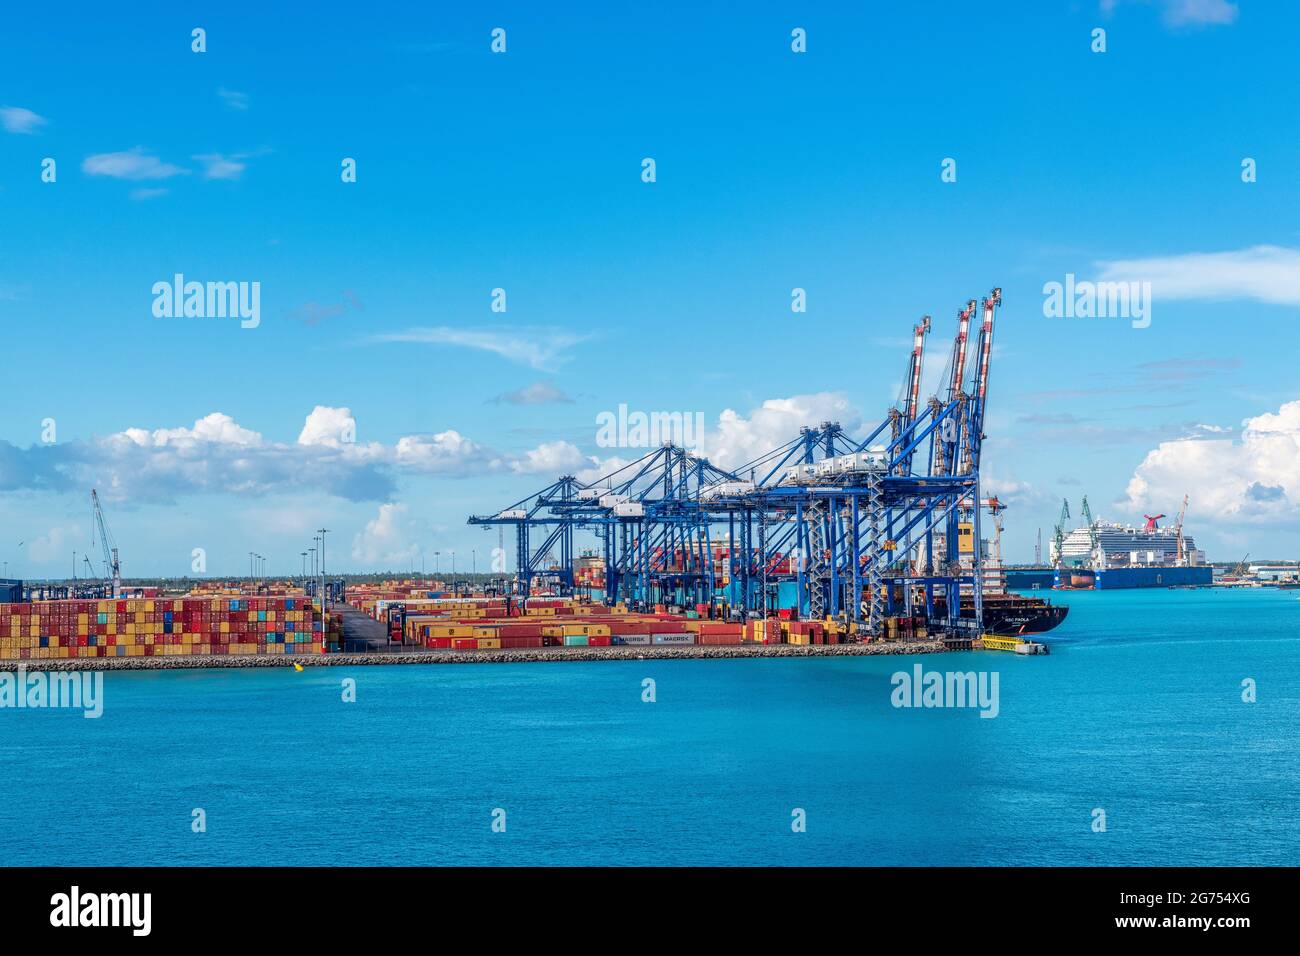 Freight cargo cranes in the port of Freeport, Bahamas Stock Photo